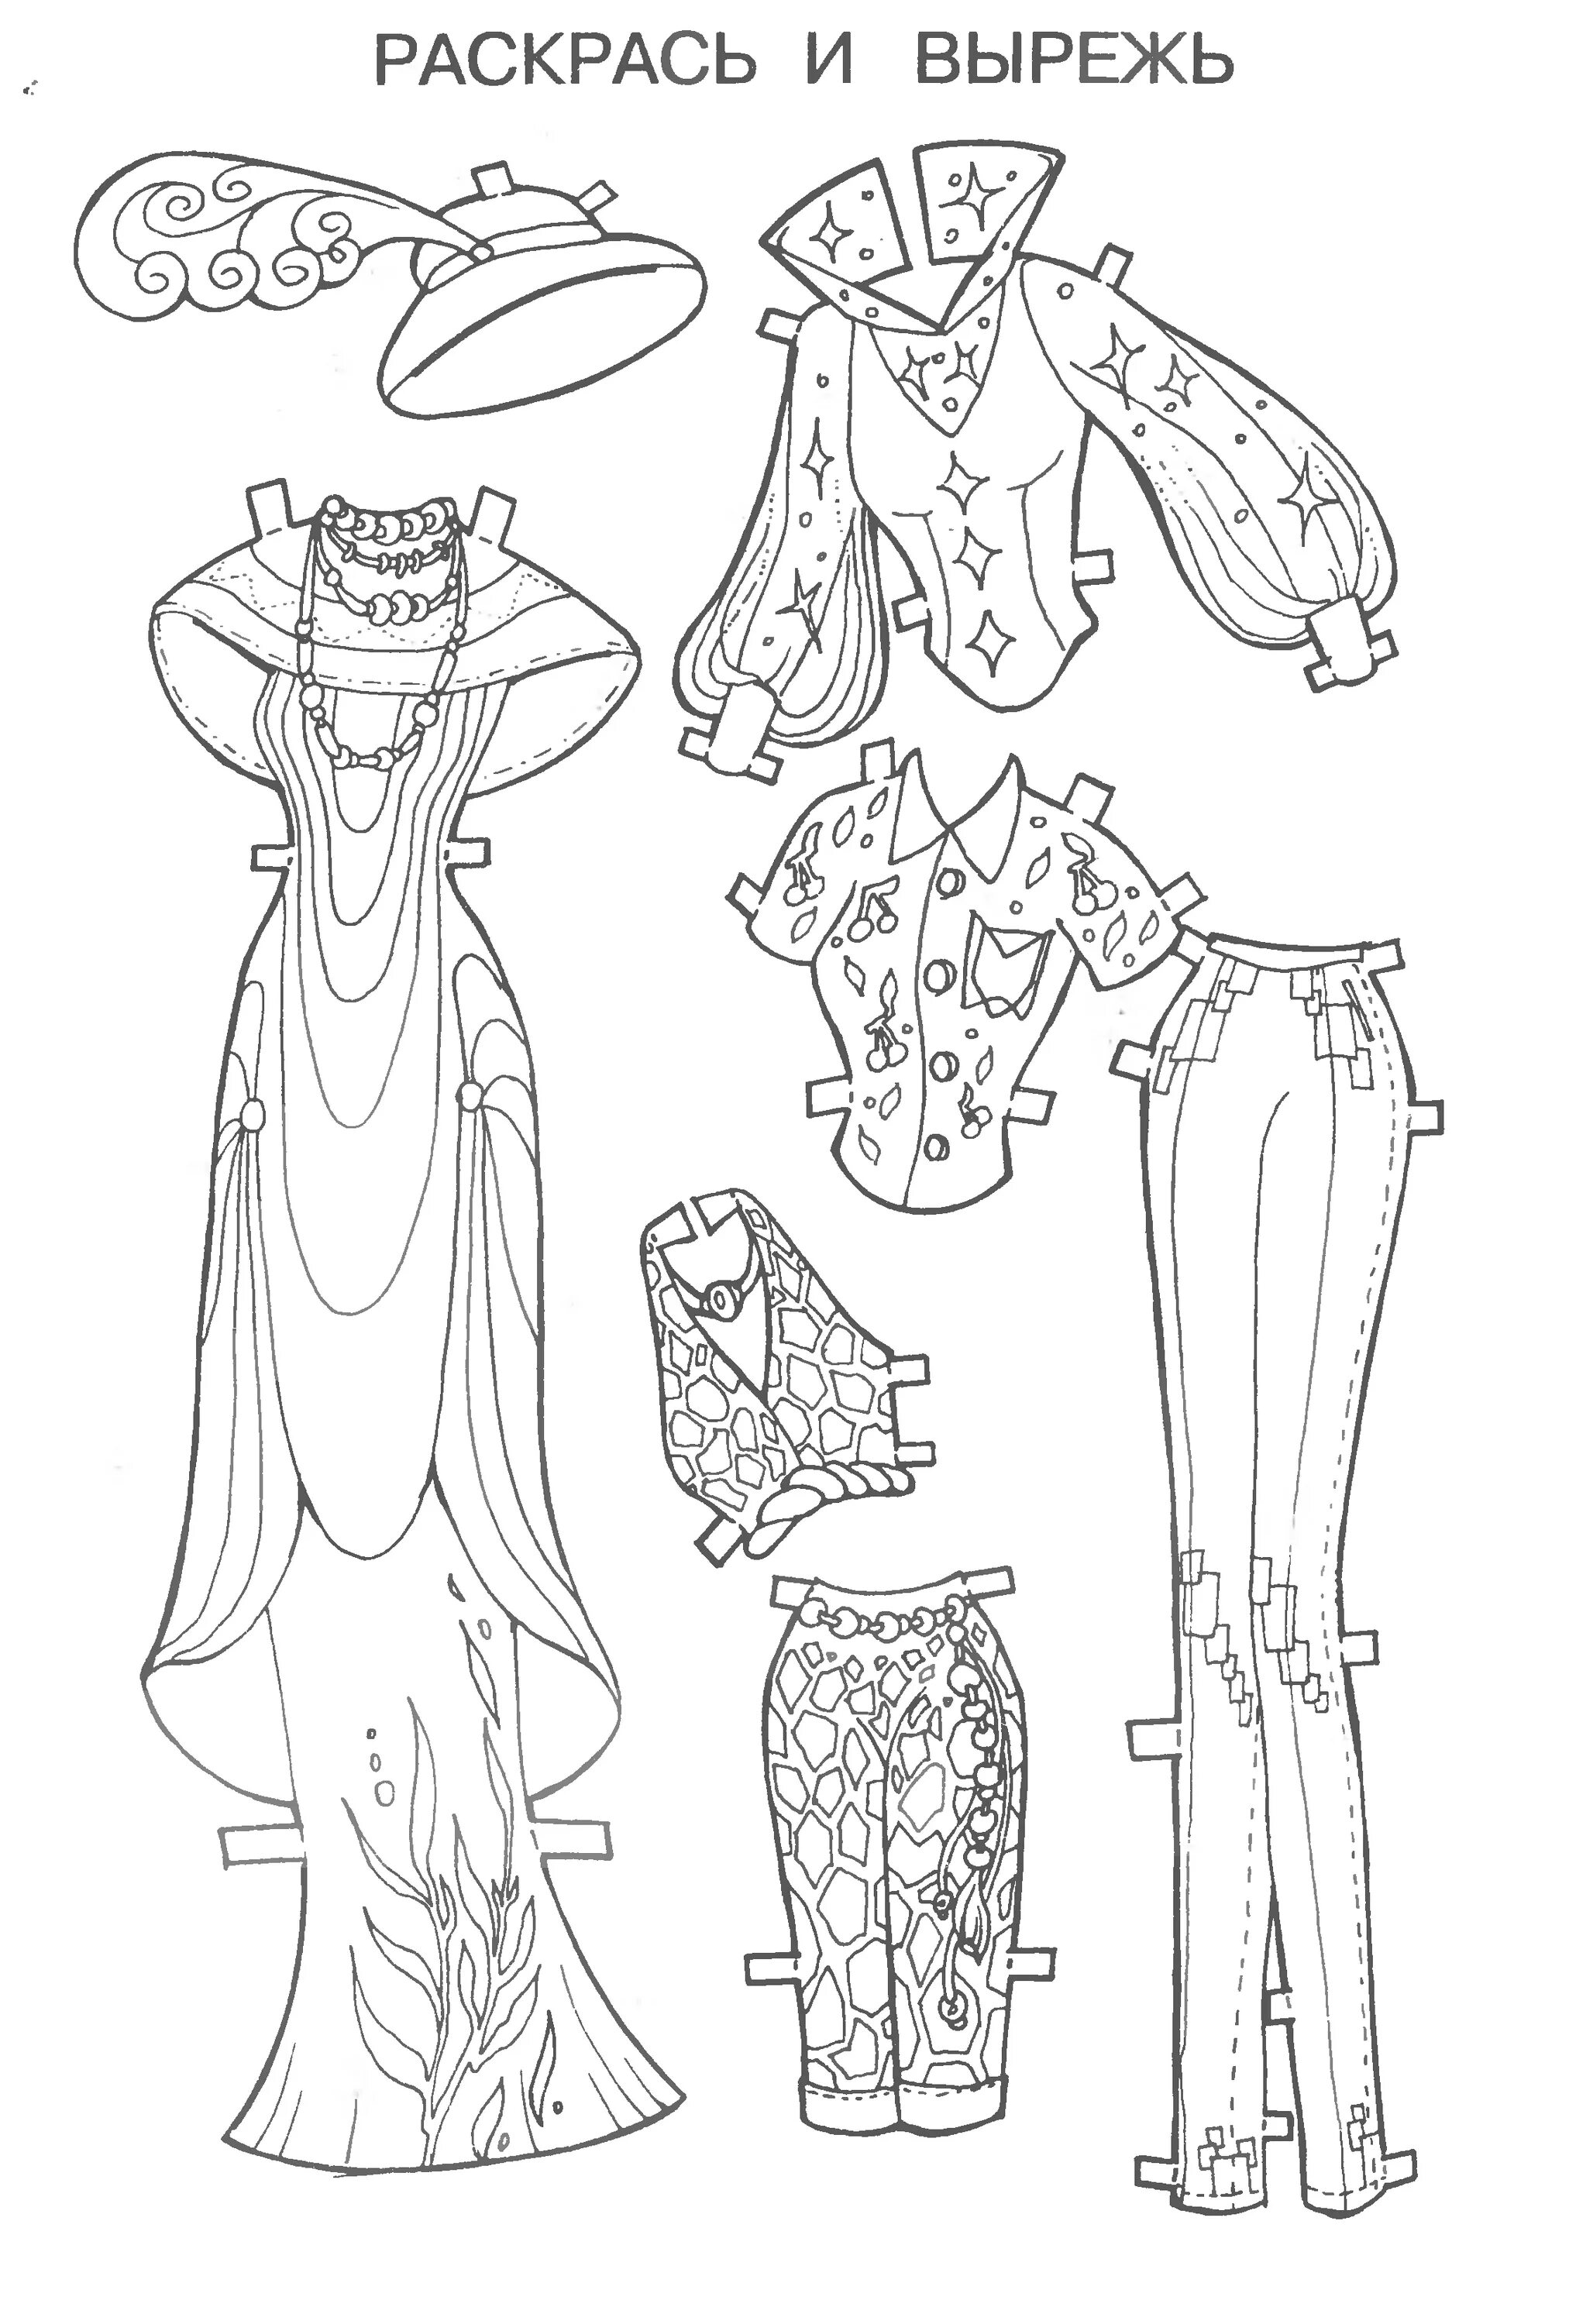 Sweet coloring paper barbie doll with clothes to cut out